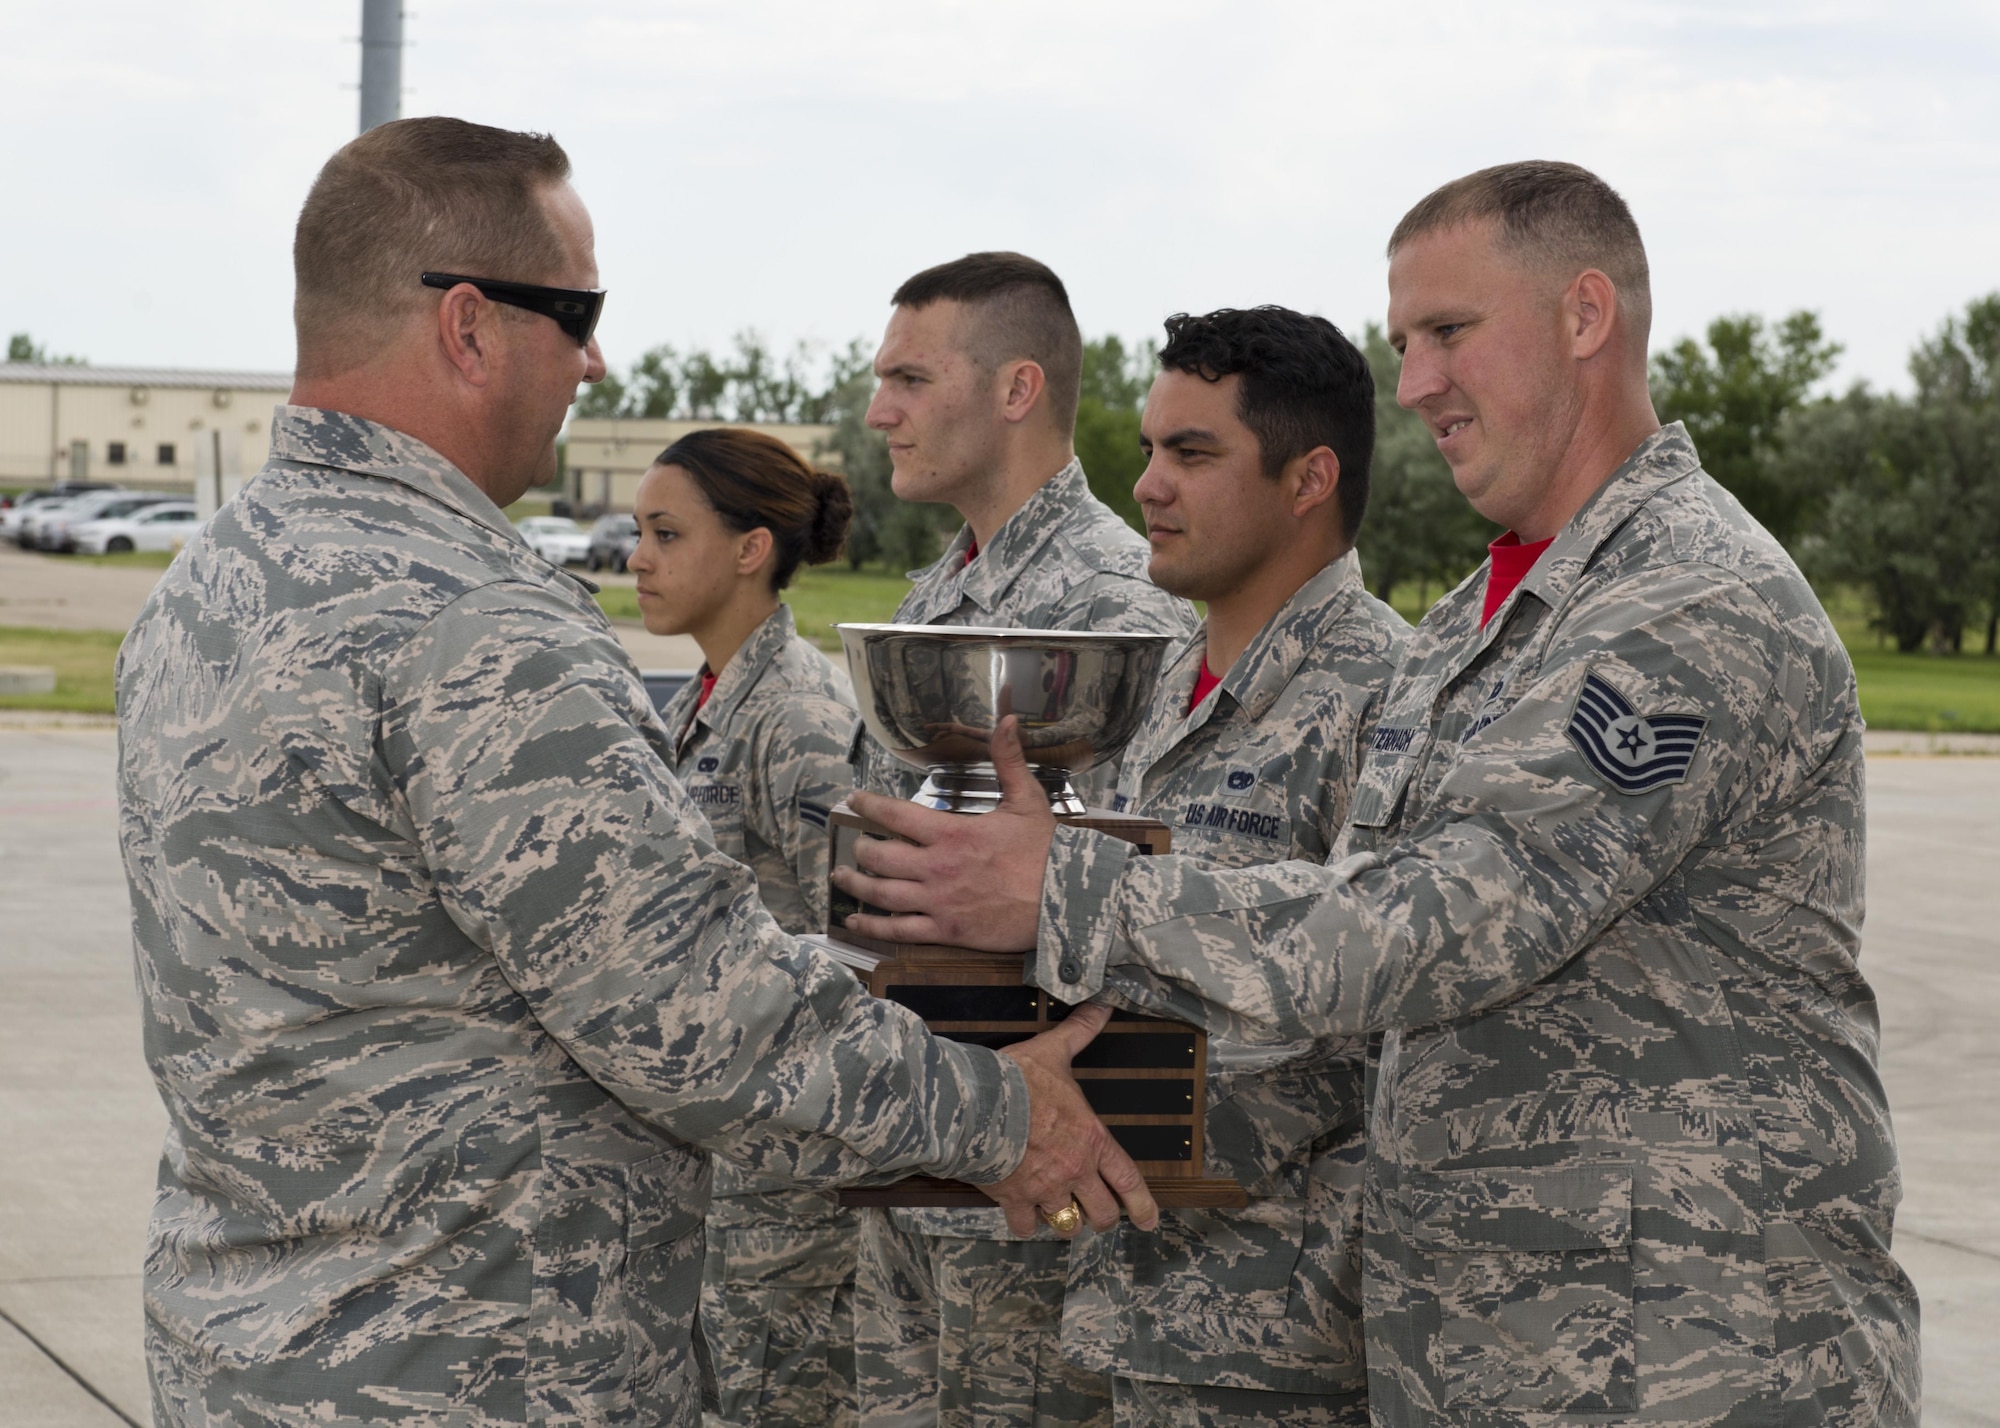 Airmen from the 23rd Aircraft Maintenance Unit are presented with the Load Crew competition trophy following the Load Crew of the Quarter competition at Minot Air Force Base, N.D., July 22, 2016. The competition was comprised of four parts: dress and appearance, a loader’s knowledge test, toolbox inspection and the timed bomb load. (U.S. Air Force photo/Airman 1st Class J.T. Armstrong)